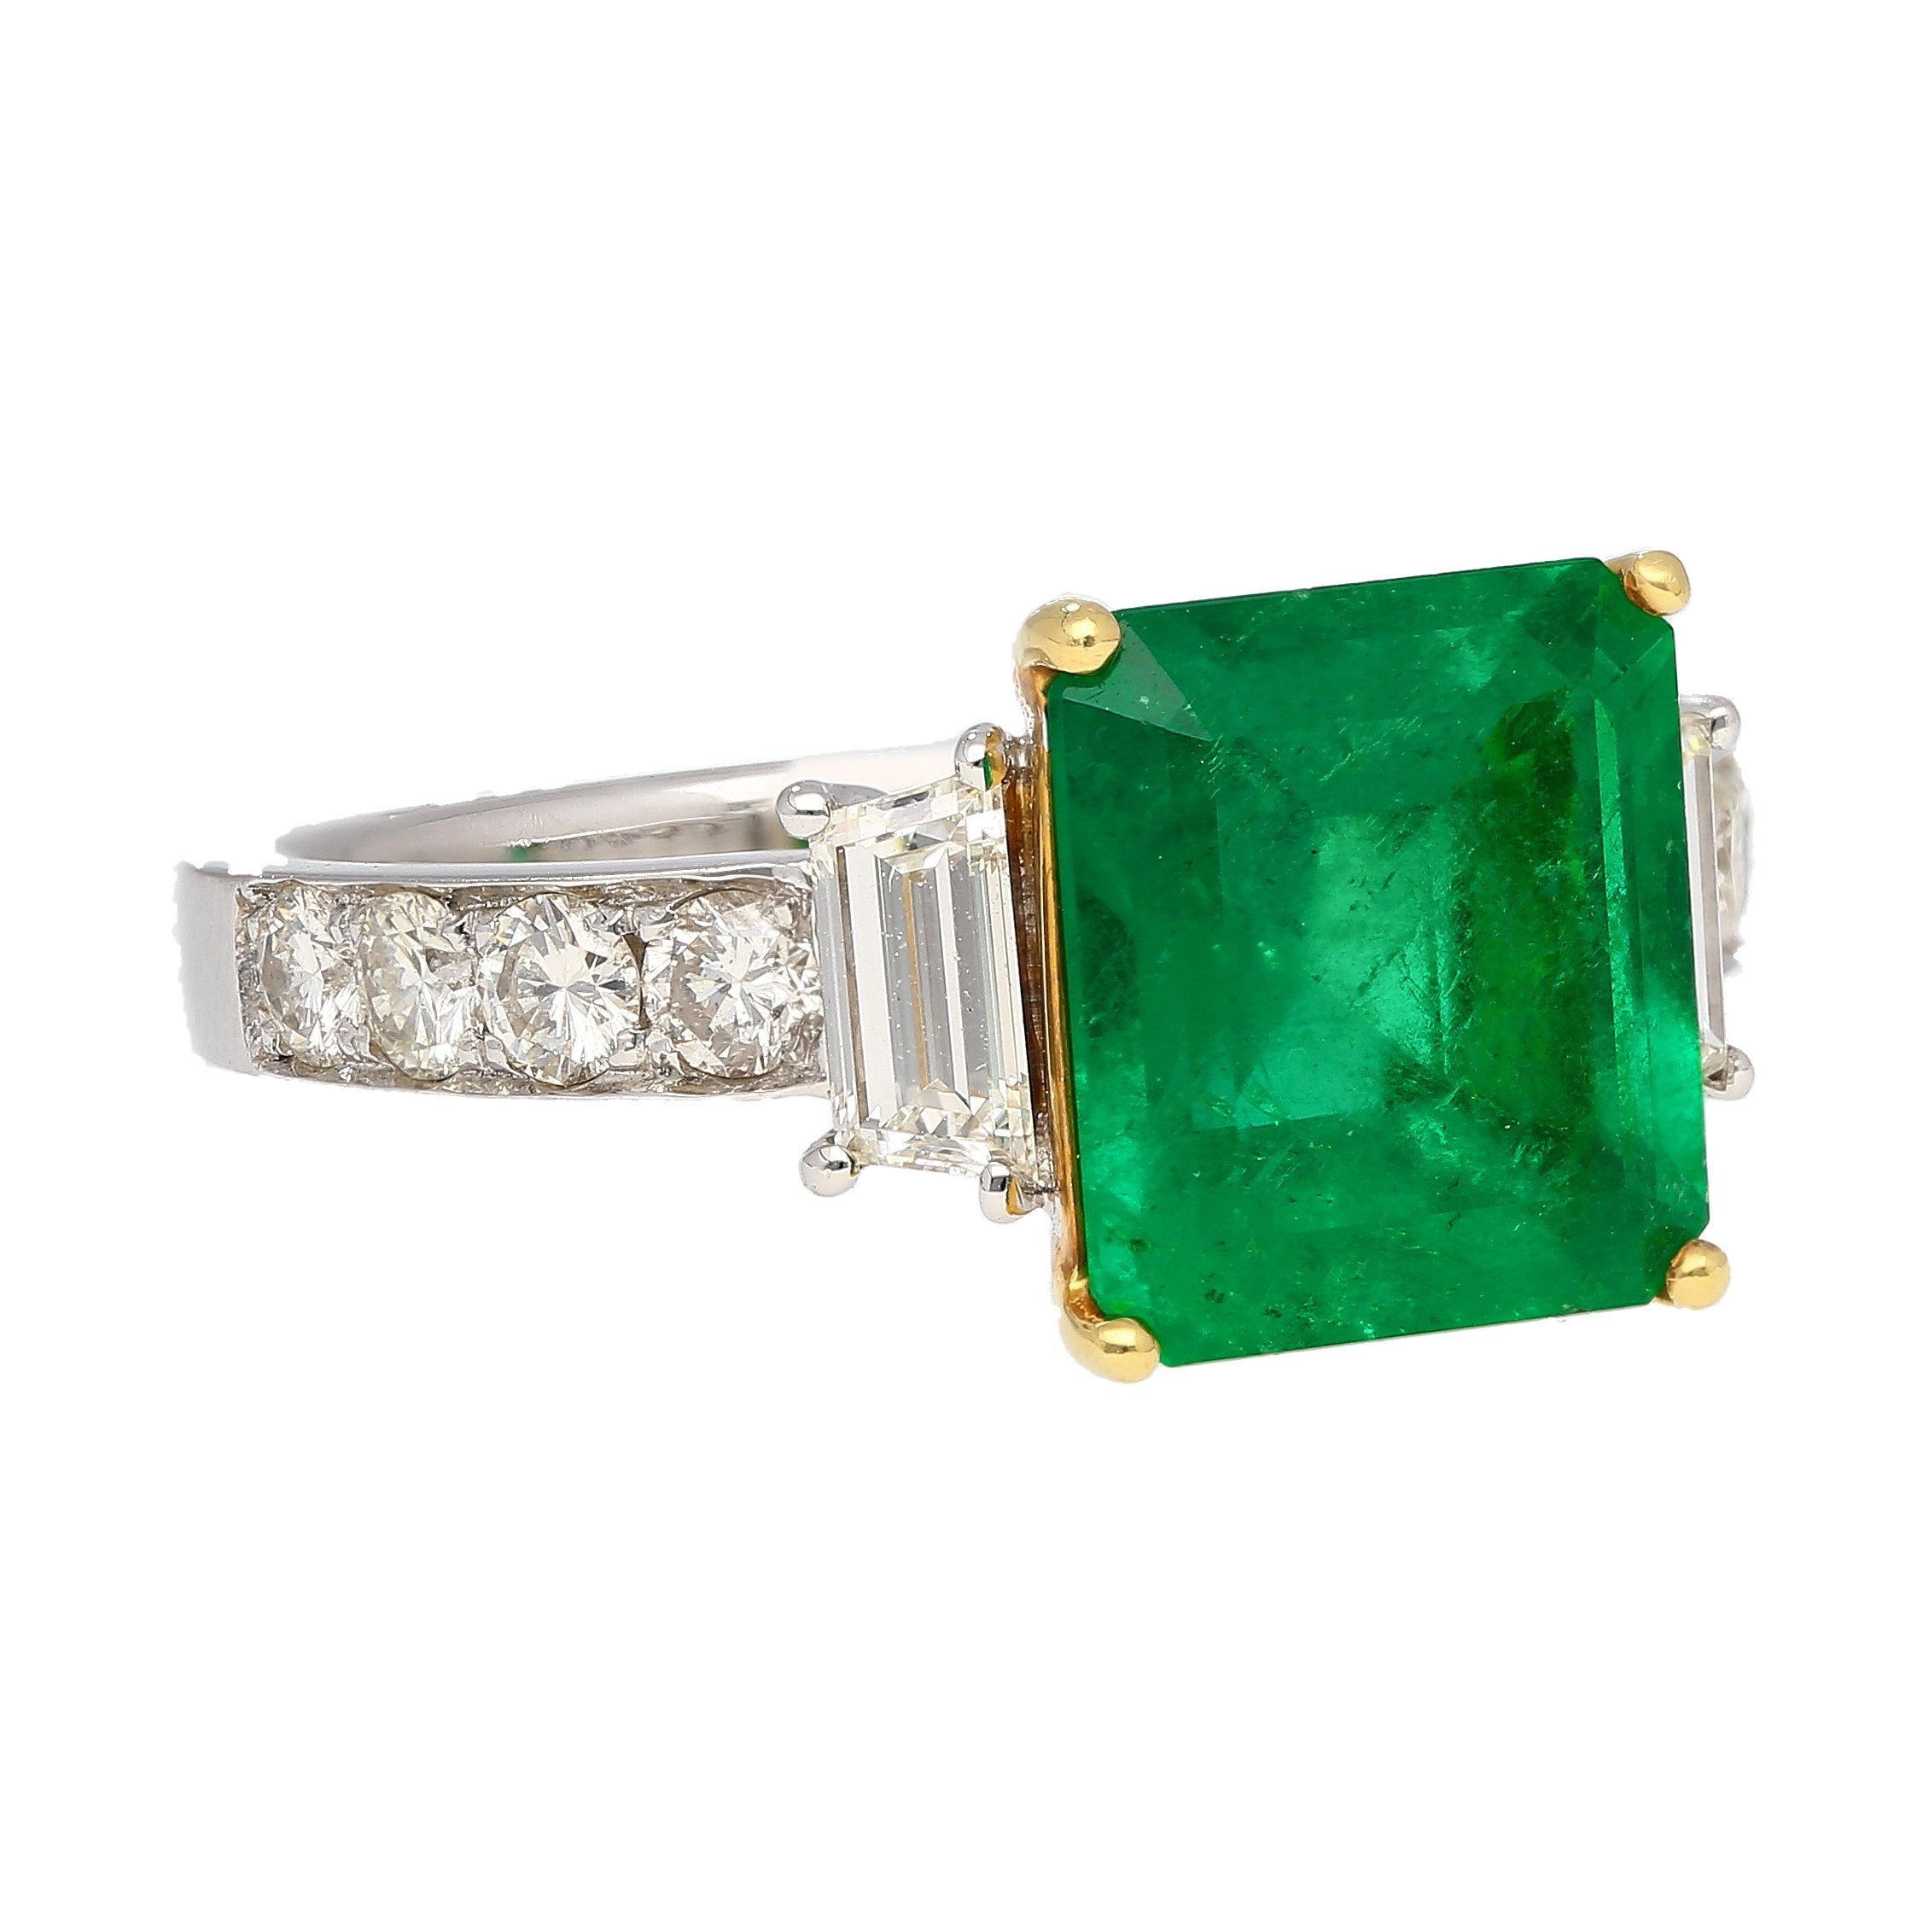 GRS-Certified-3_16-Carat-Vivid-Green-Minor-Oil-Colombia-Emerald-and-Diamond-18K-Ring-GRS-Appendix_-Rings-2.jpg